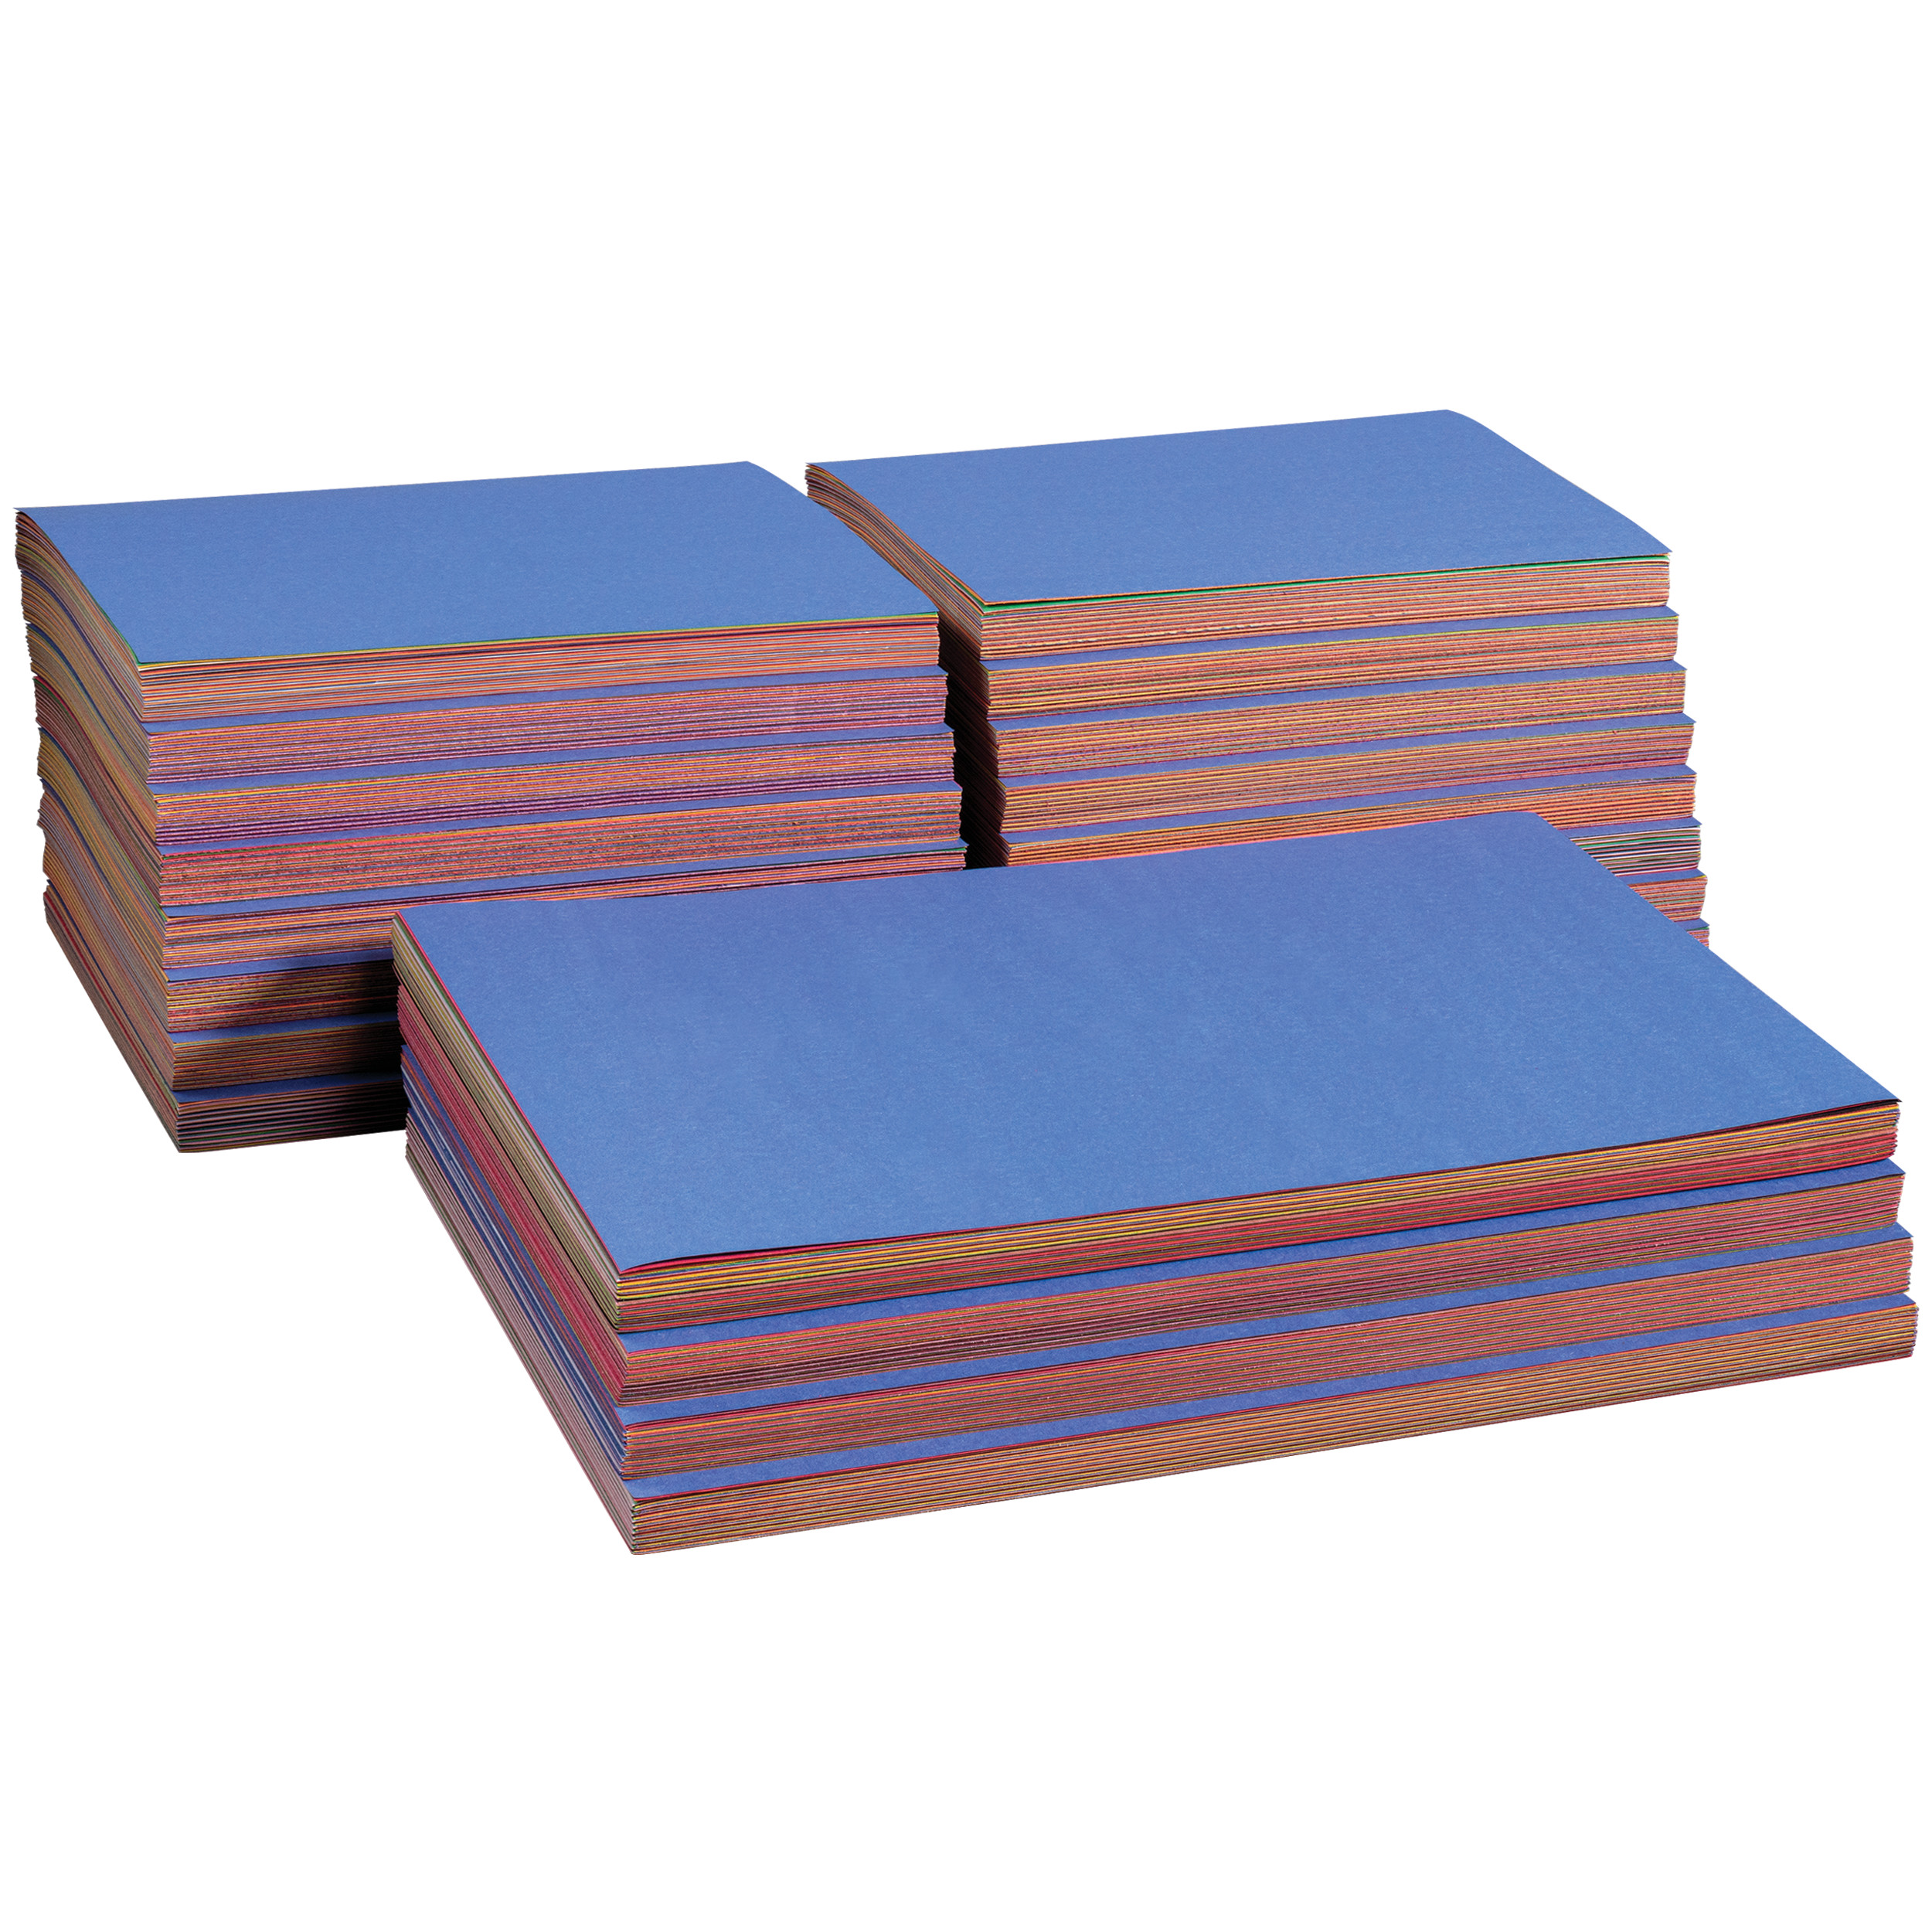 Buy Prang® Groundwood Construction Paper, 10 Colors, 9 x 12 (Pack of 100)  at S&S Worldwide